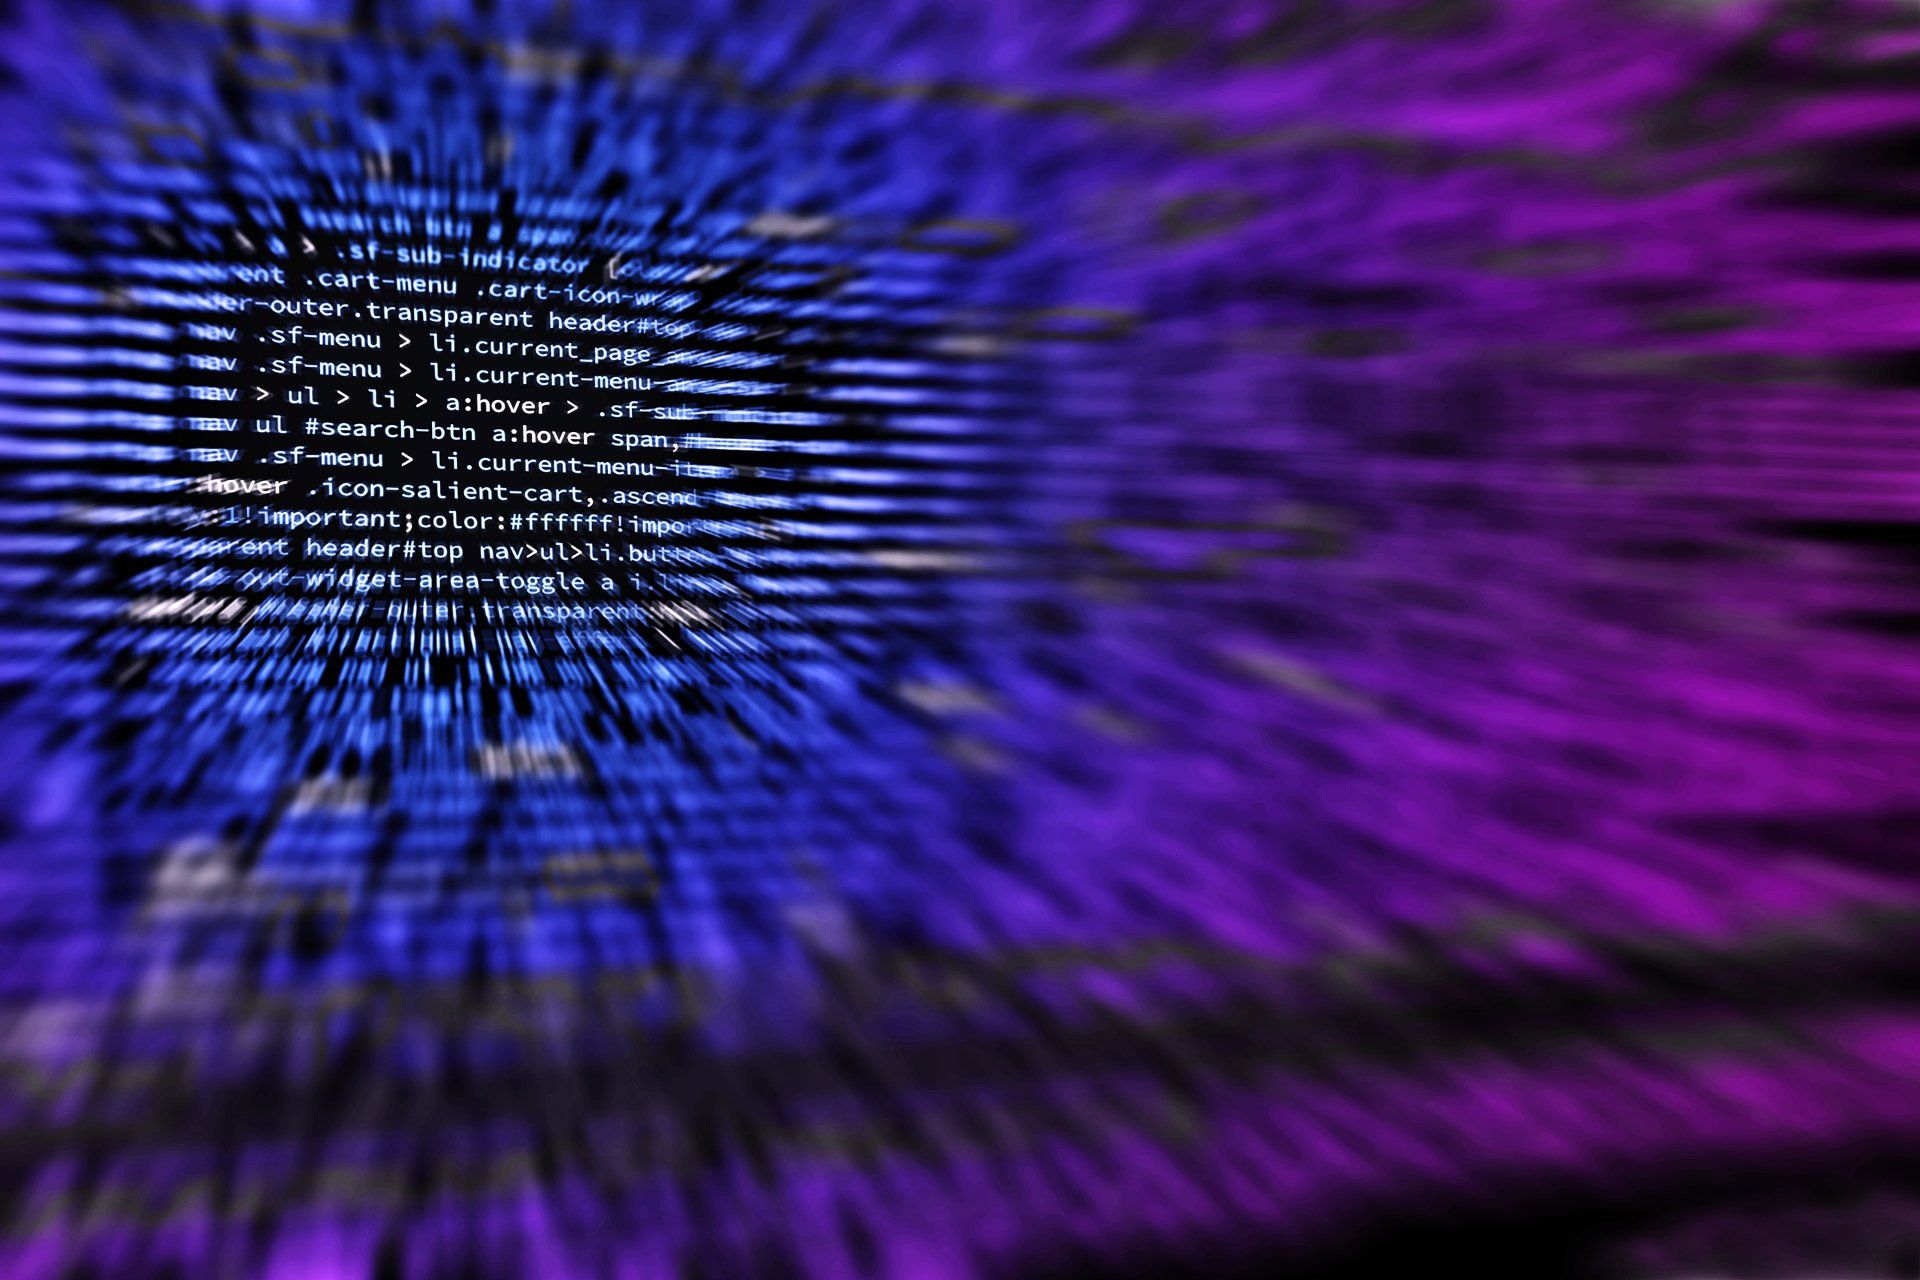 A blurry image of a blue and purple background with computer code.